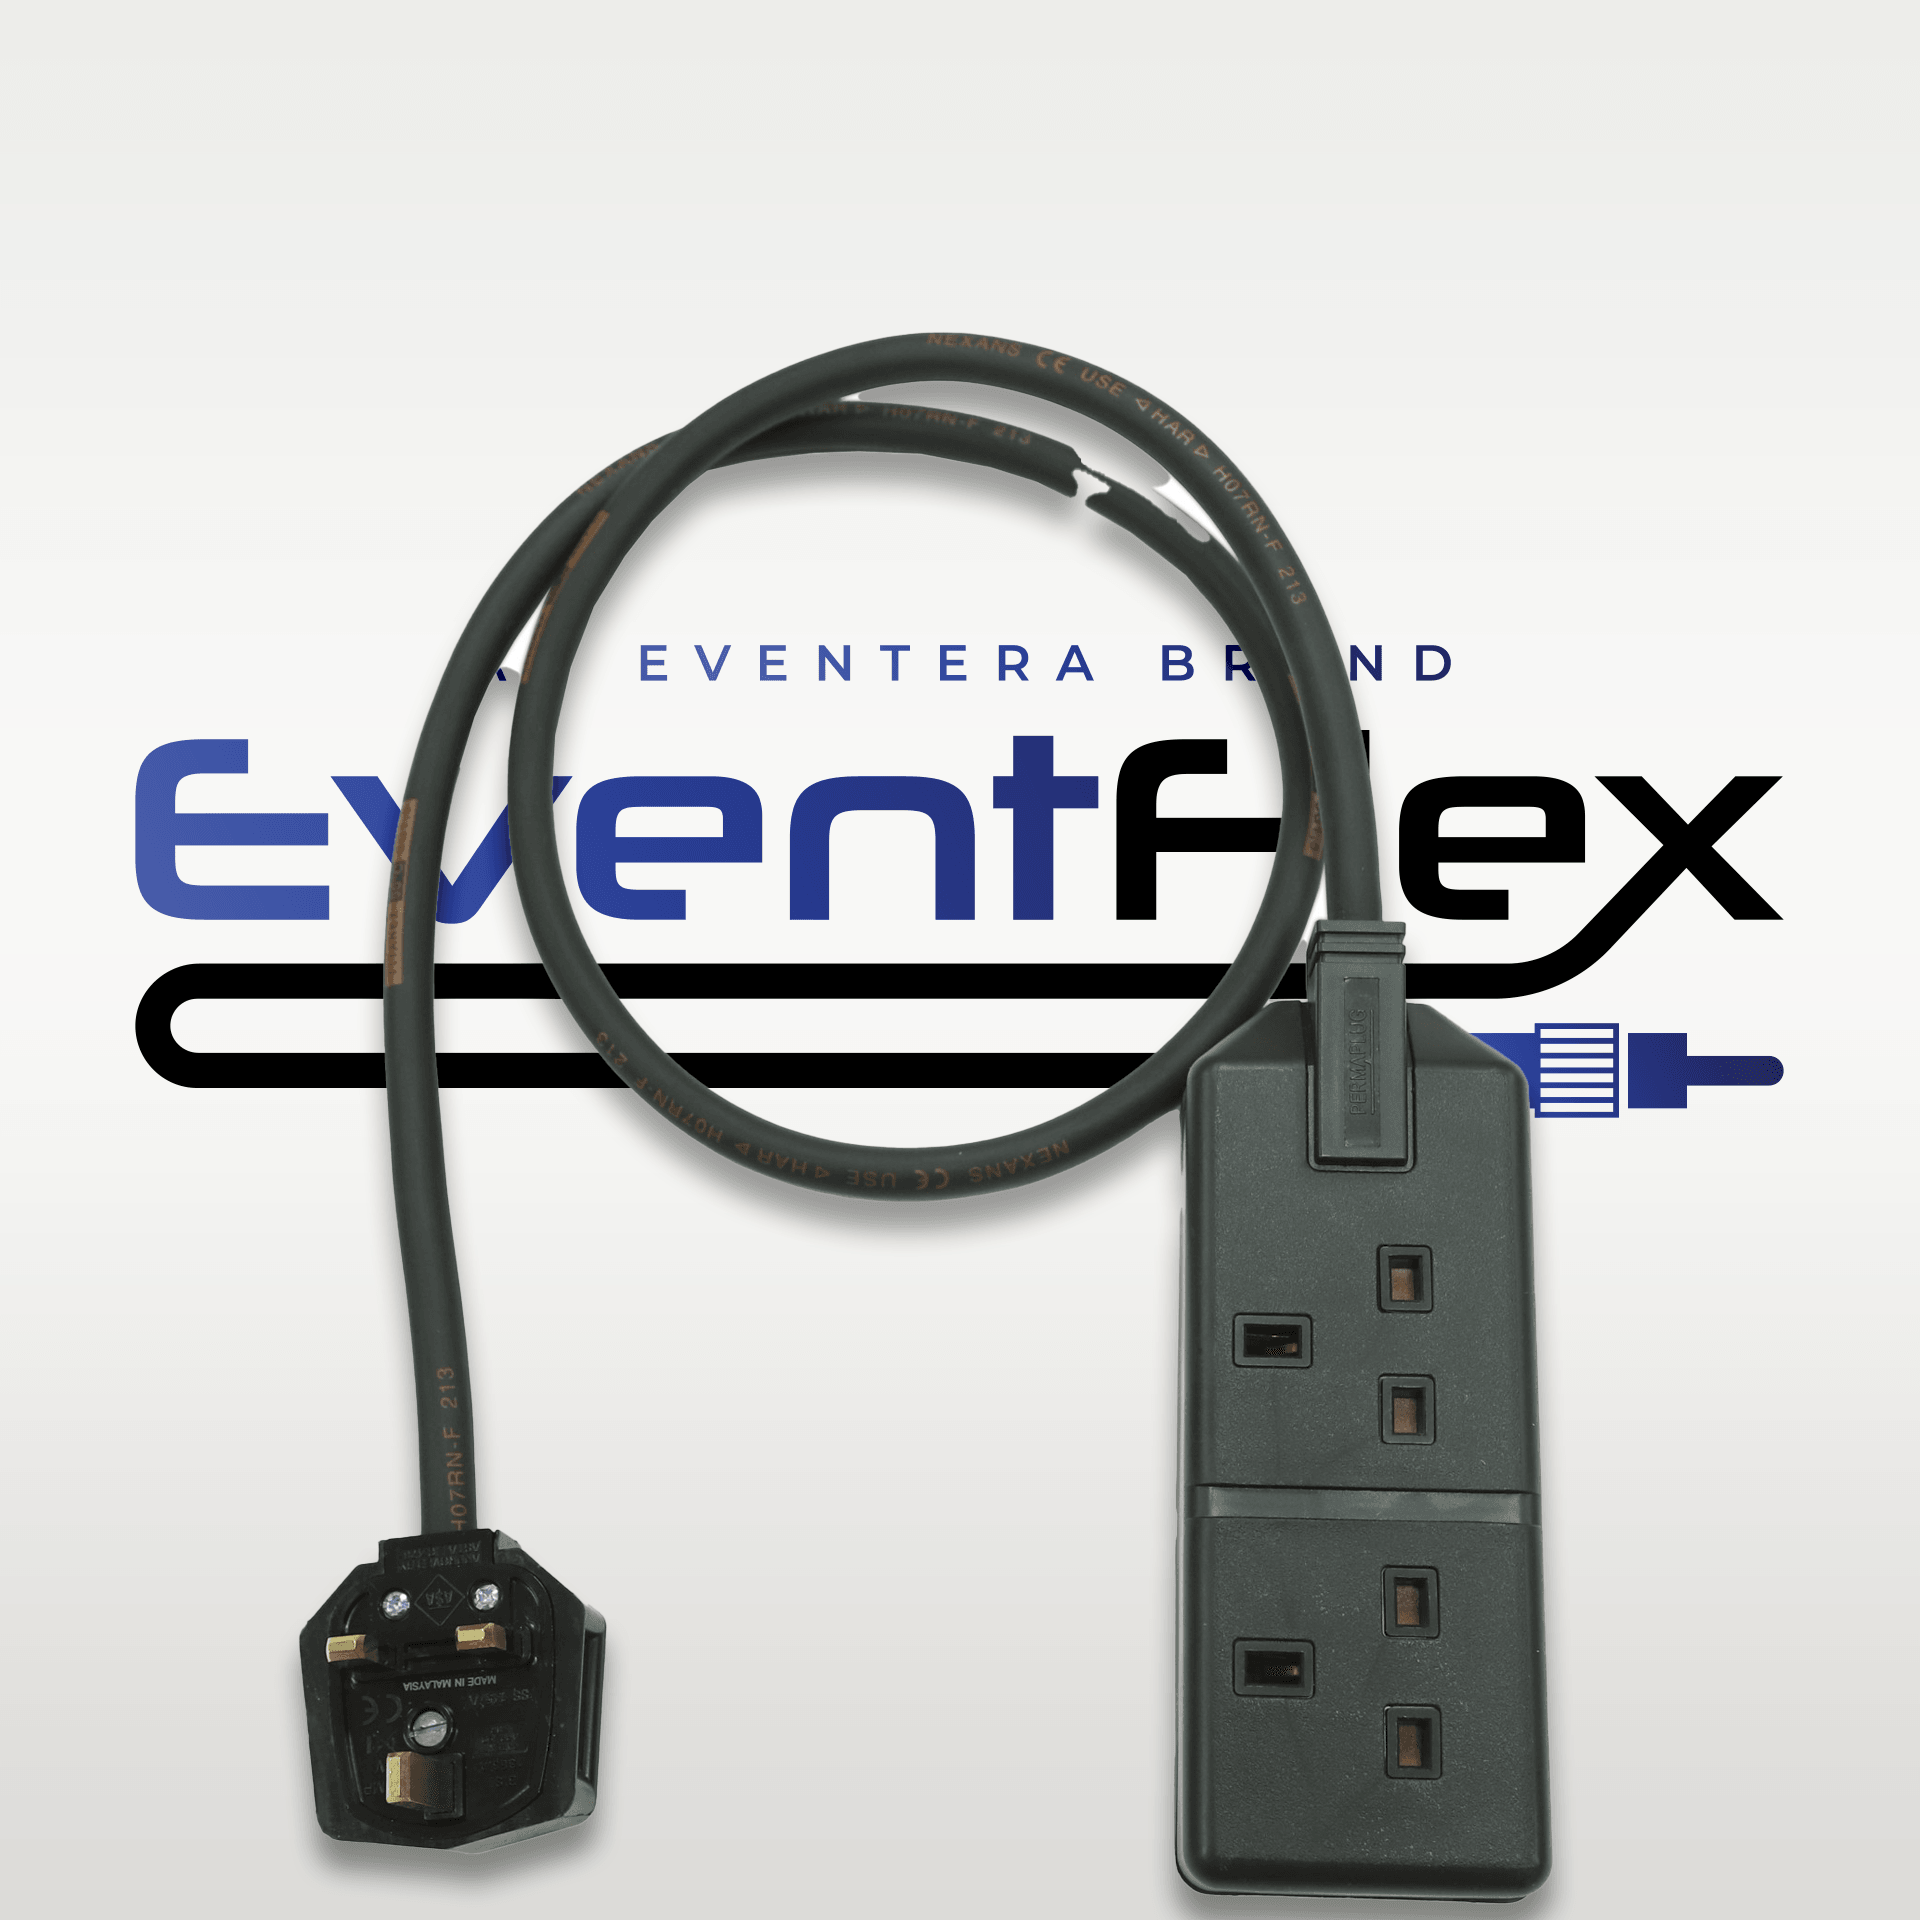 EventFlex -Heavy Duty Extension Cable 13A 2 Gang 230V with 1.5mm Black Rubber HO7 Cable - Eventera AV LTD